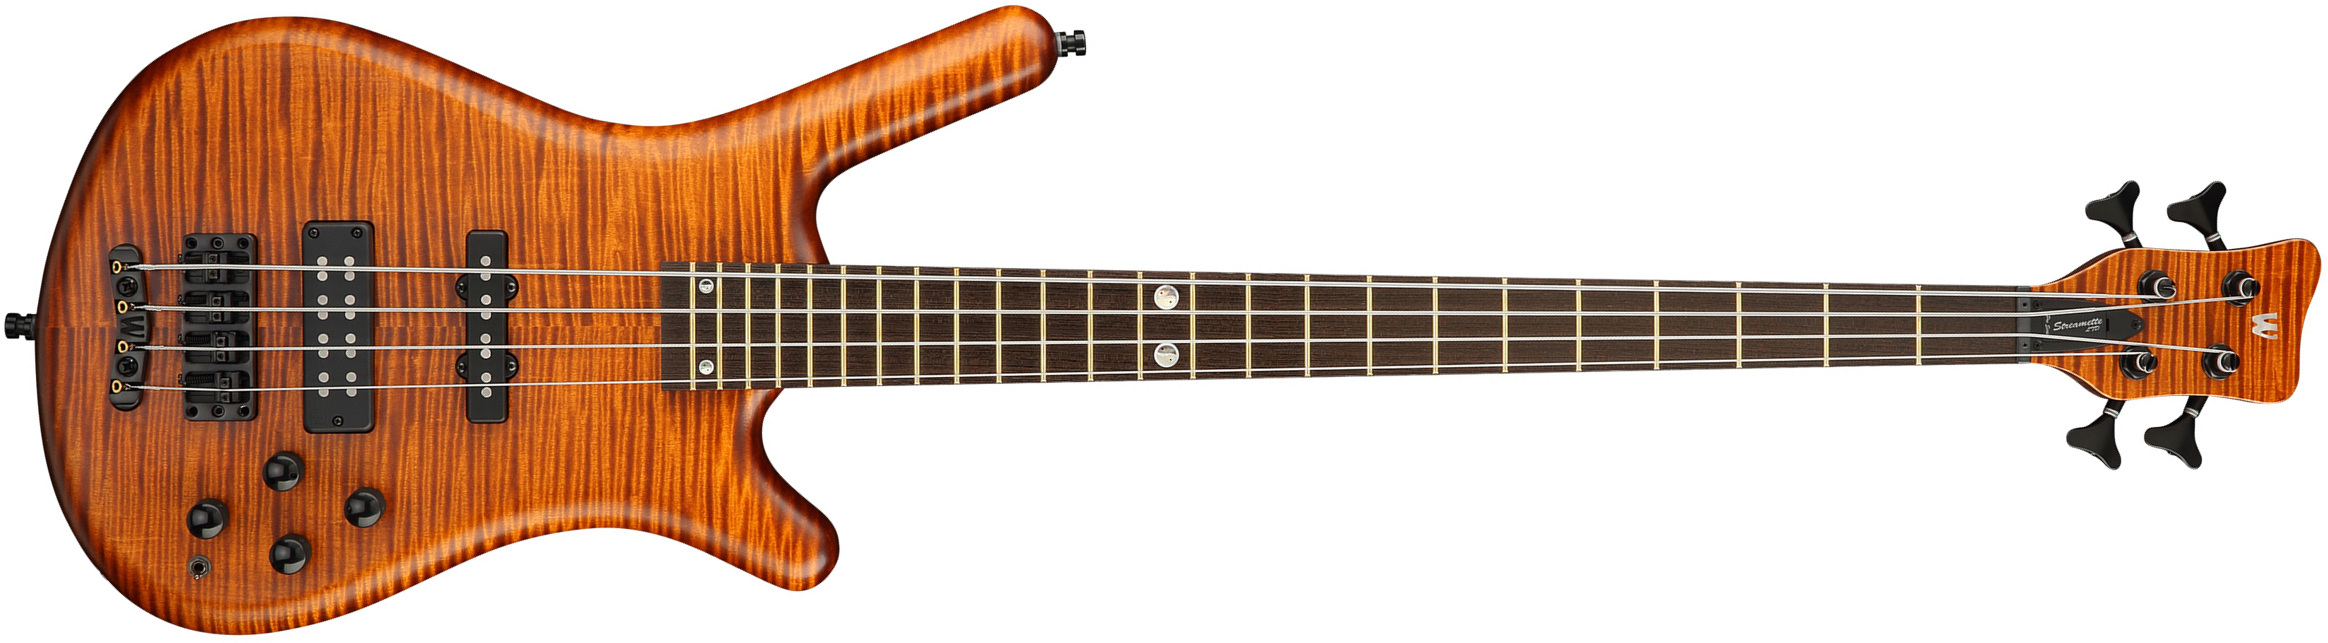 Warwick Streamette 4c Pro Gps Ltd Active Wen - Special Amber Transparent Satin - Solid body electric bass - Main picture